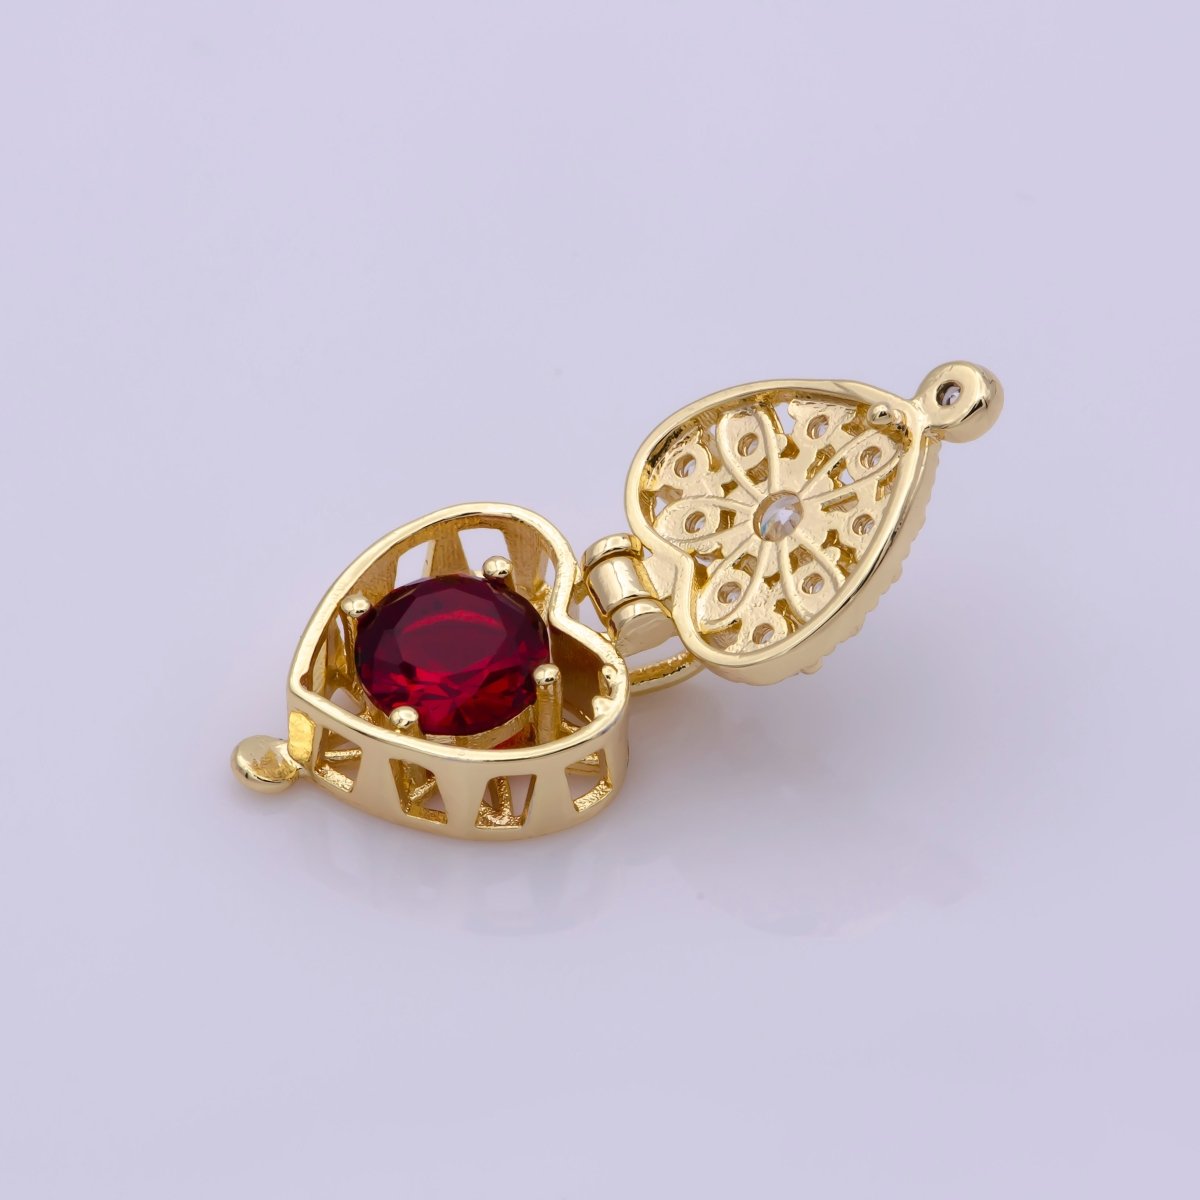 16K Gold Filled Mini Heart Cage Locket Charm with Red CZ Inside N-195 - DLUXCA